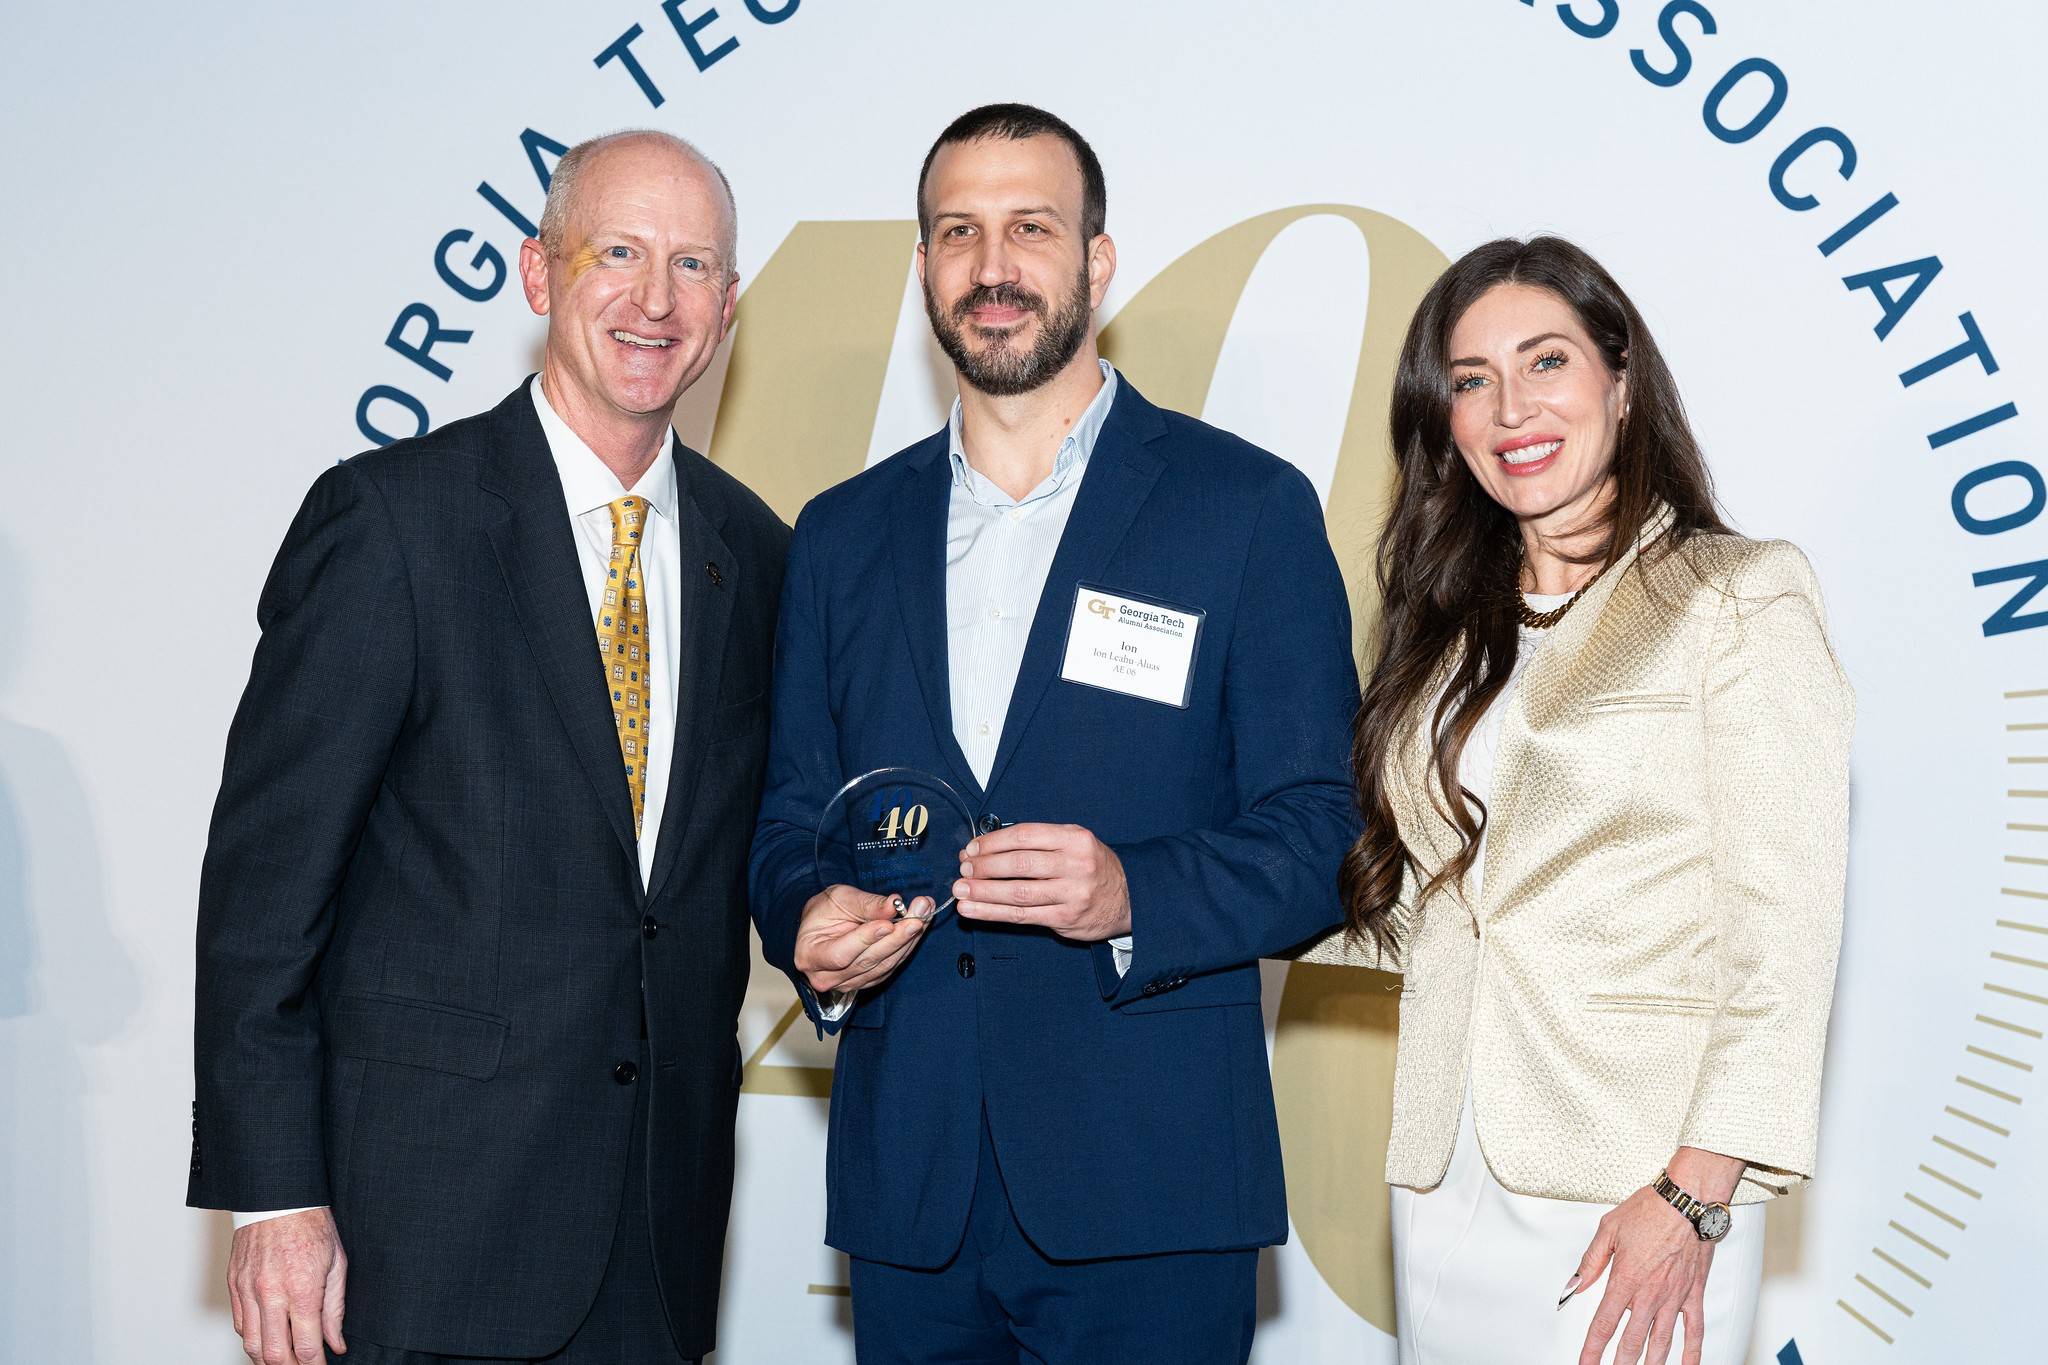 Ion Leahu-Aluas, co-founder of Driveco, elected one of Georgia Tech’s 40 Under 40